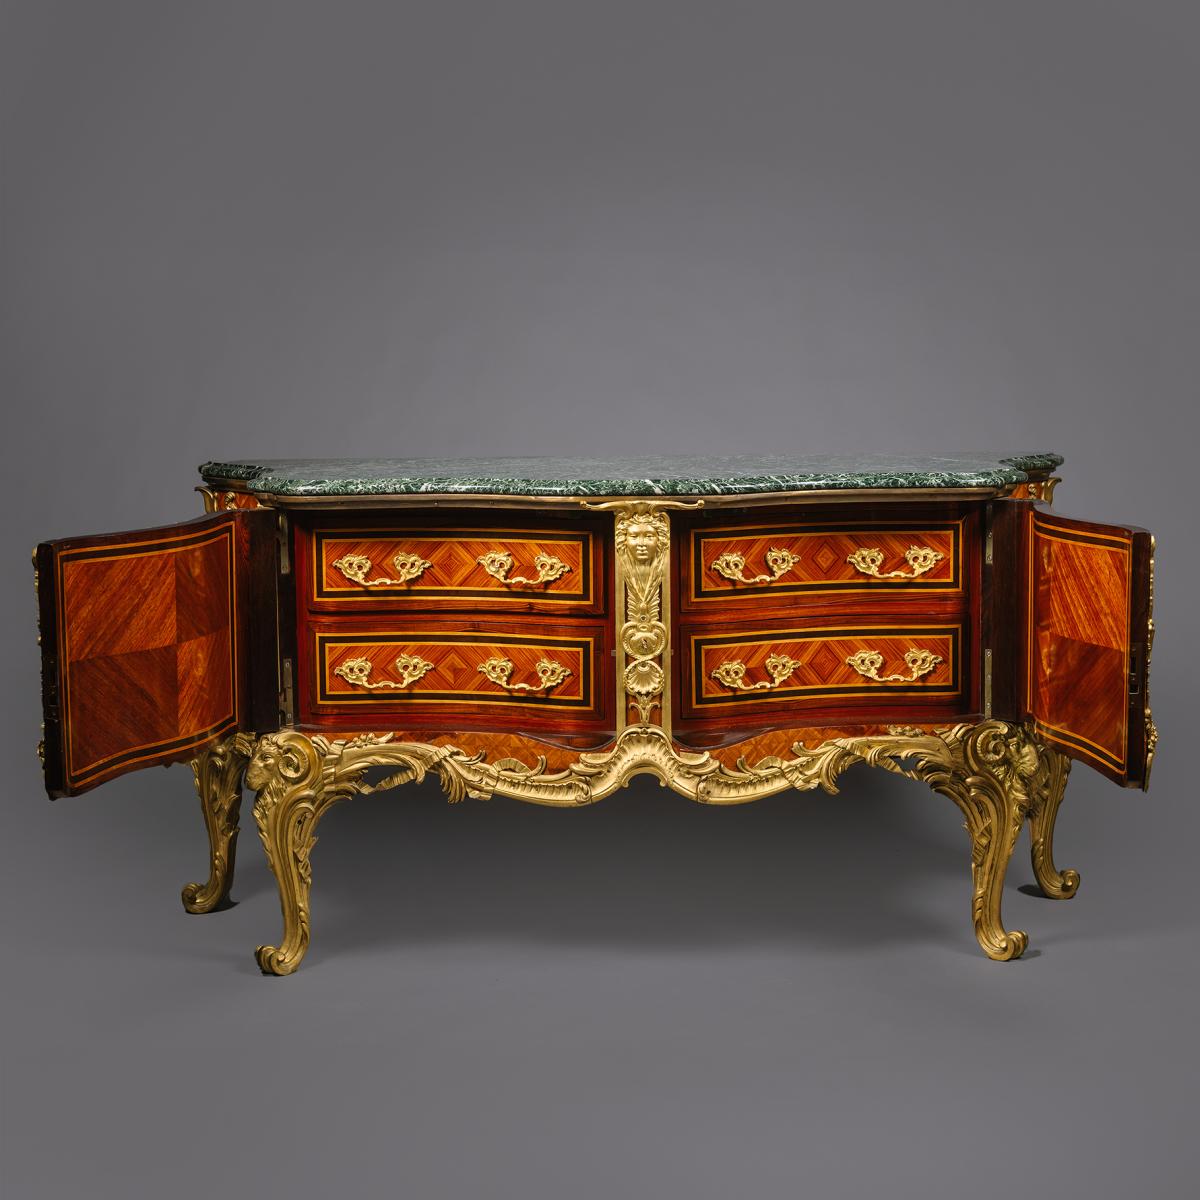 Magnificent Gilt-Bronze Mounted Parquetry Commode